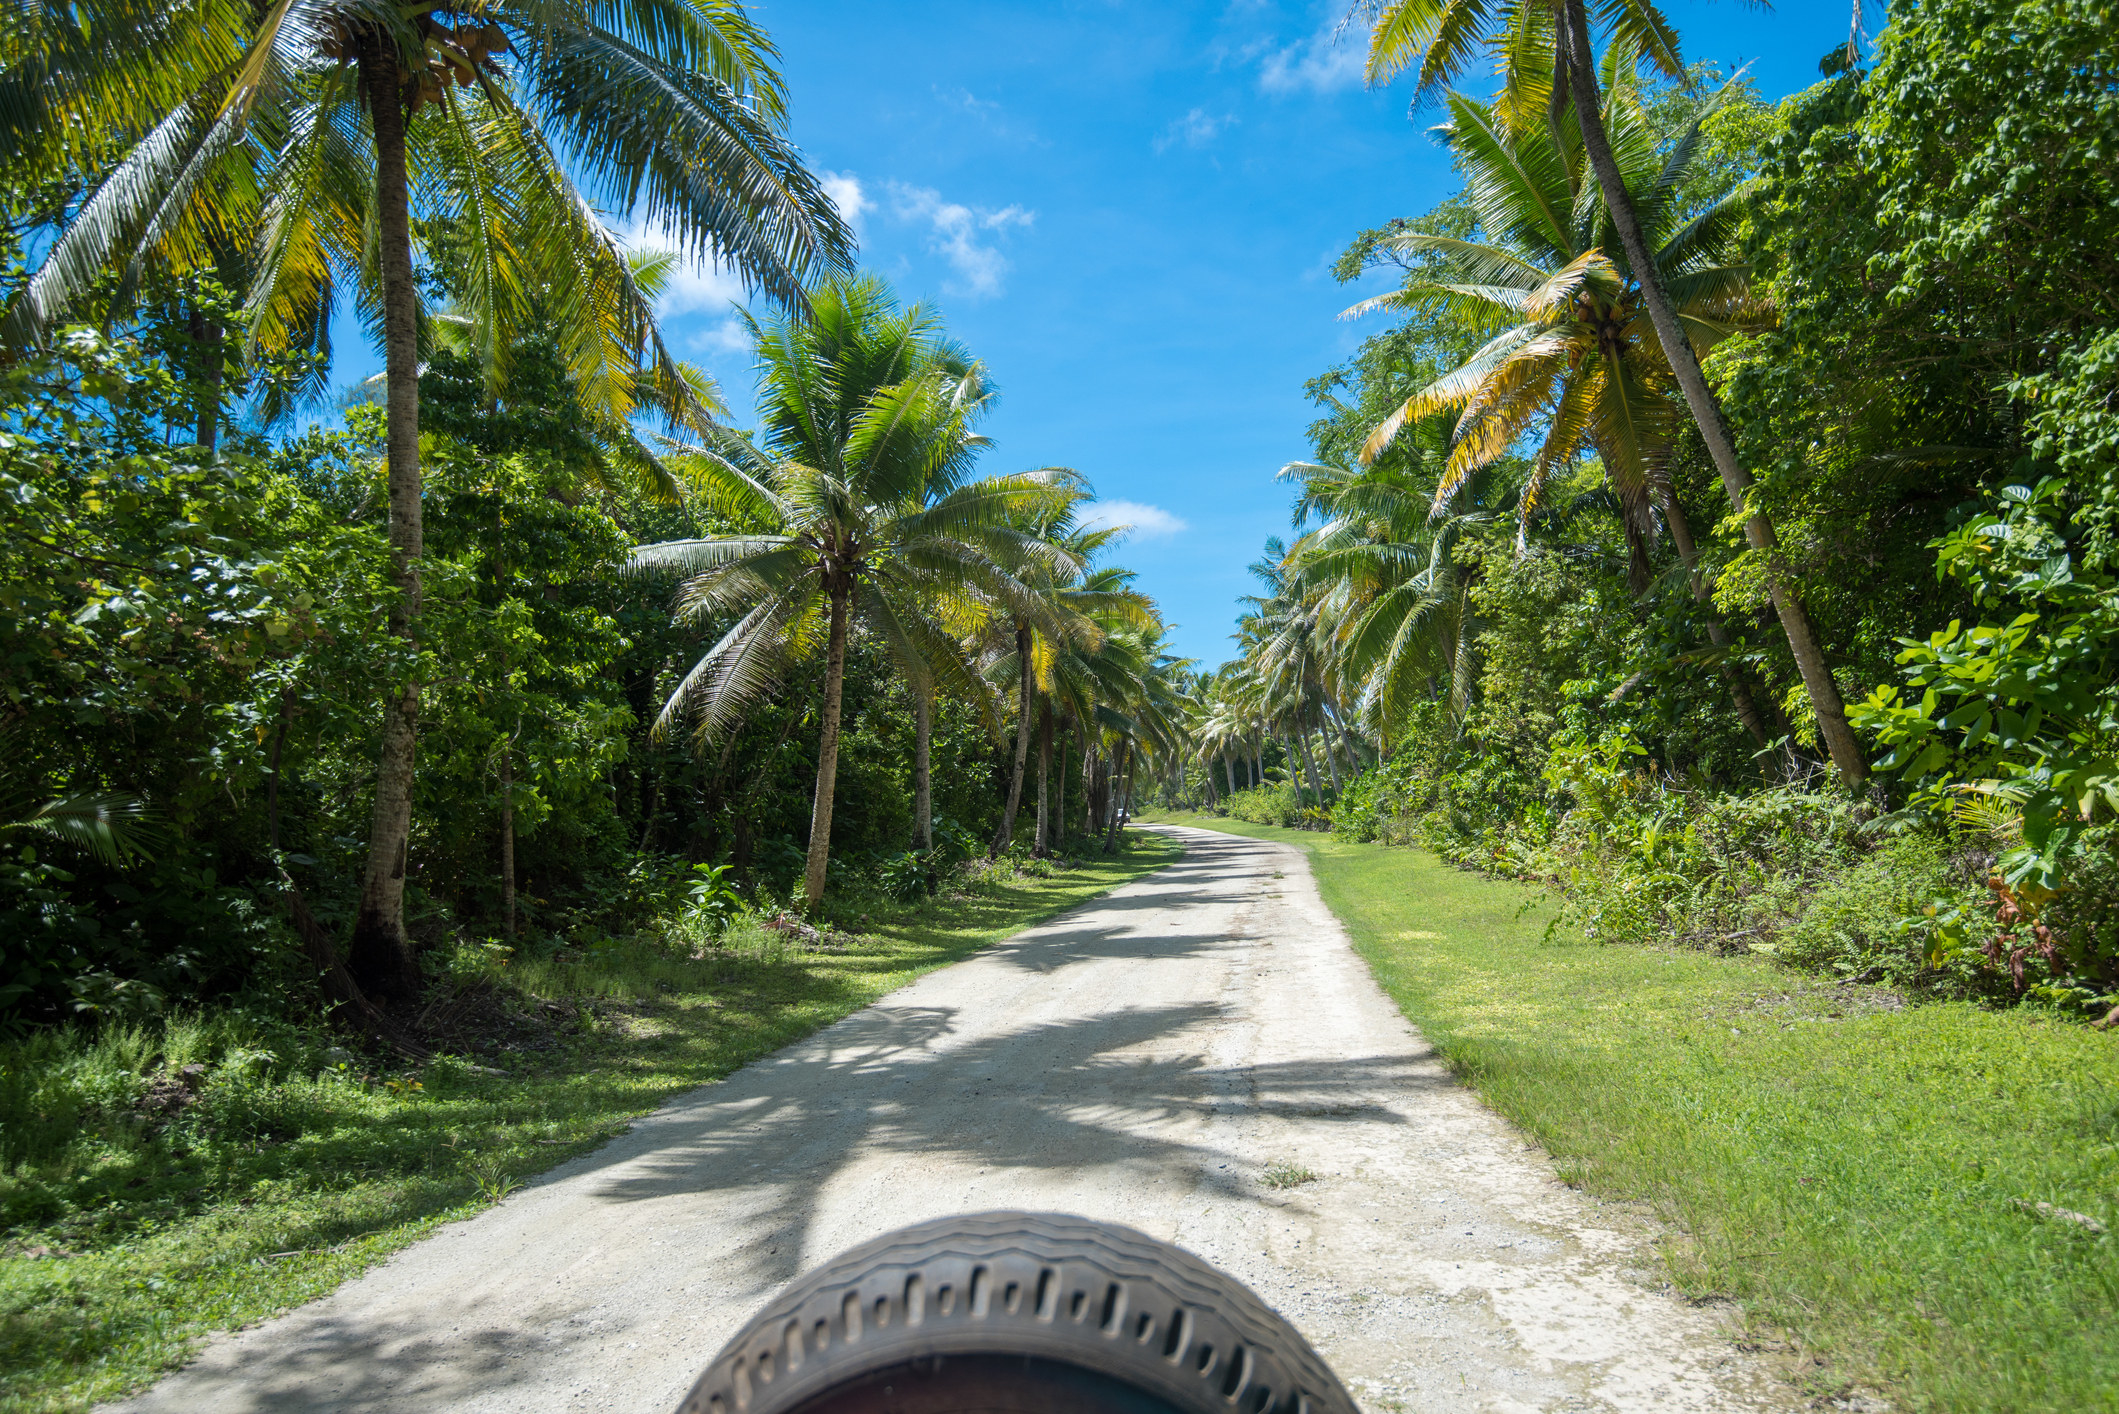 A wide open road with tropical trees.